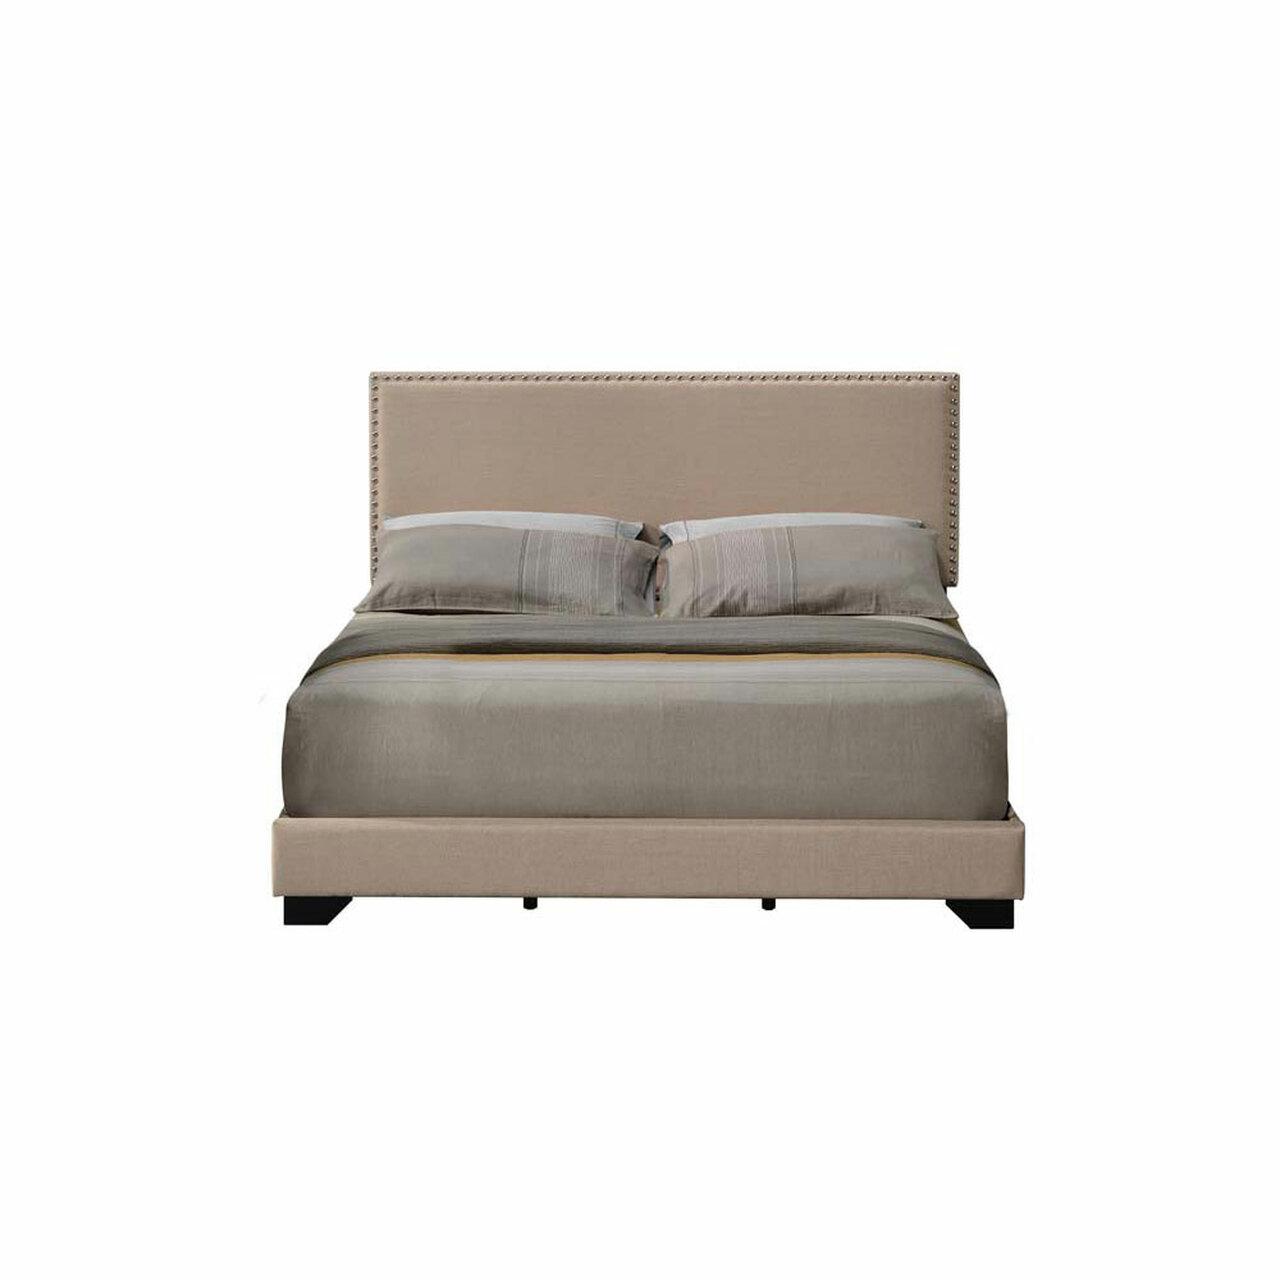 Modern Queen Bed Leandros 27420Q in Beige Fabric